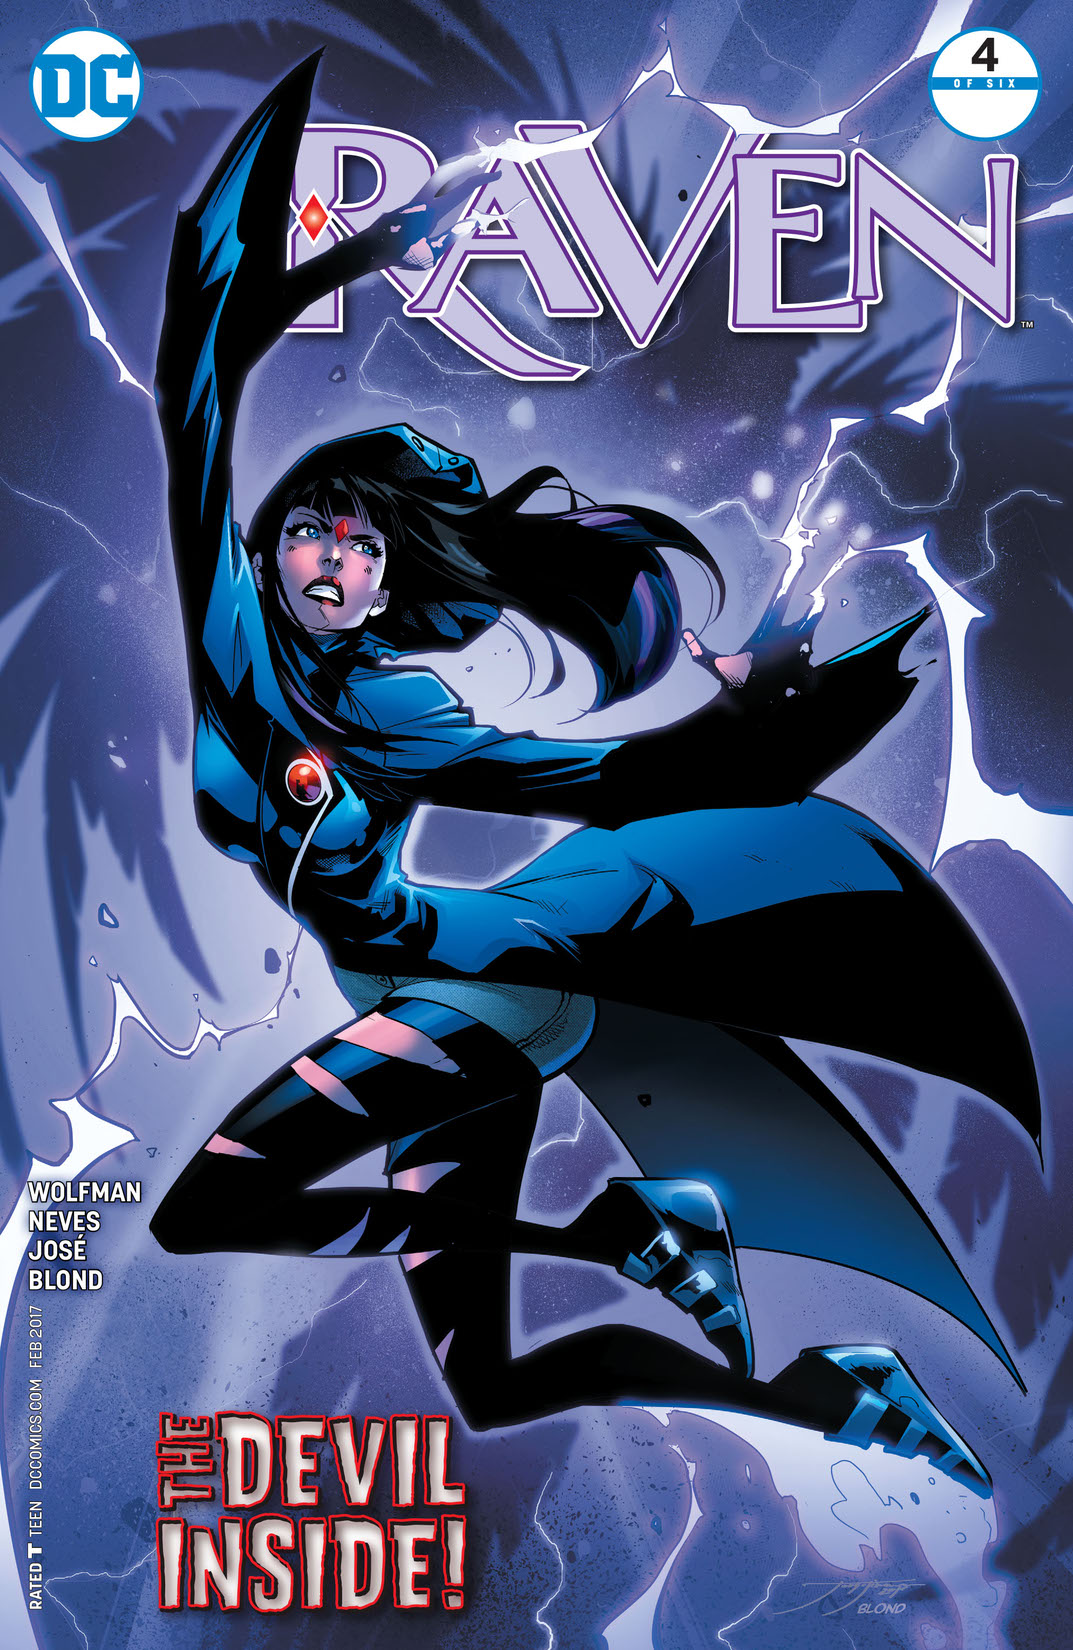 Raven #4 preview images